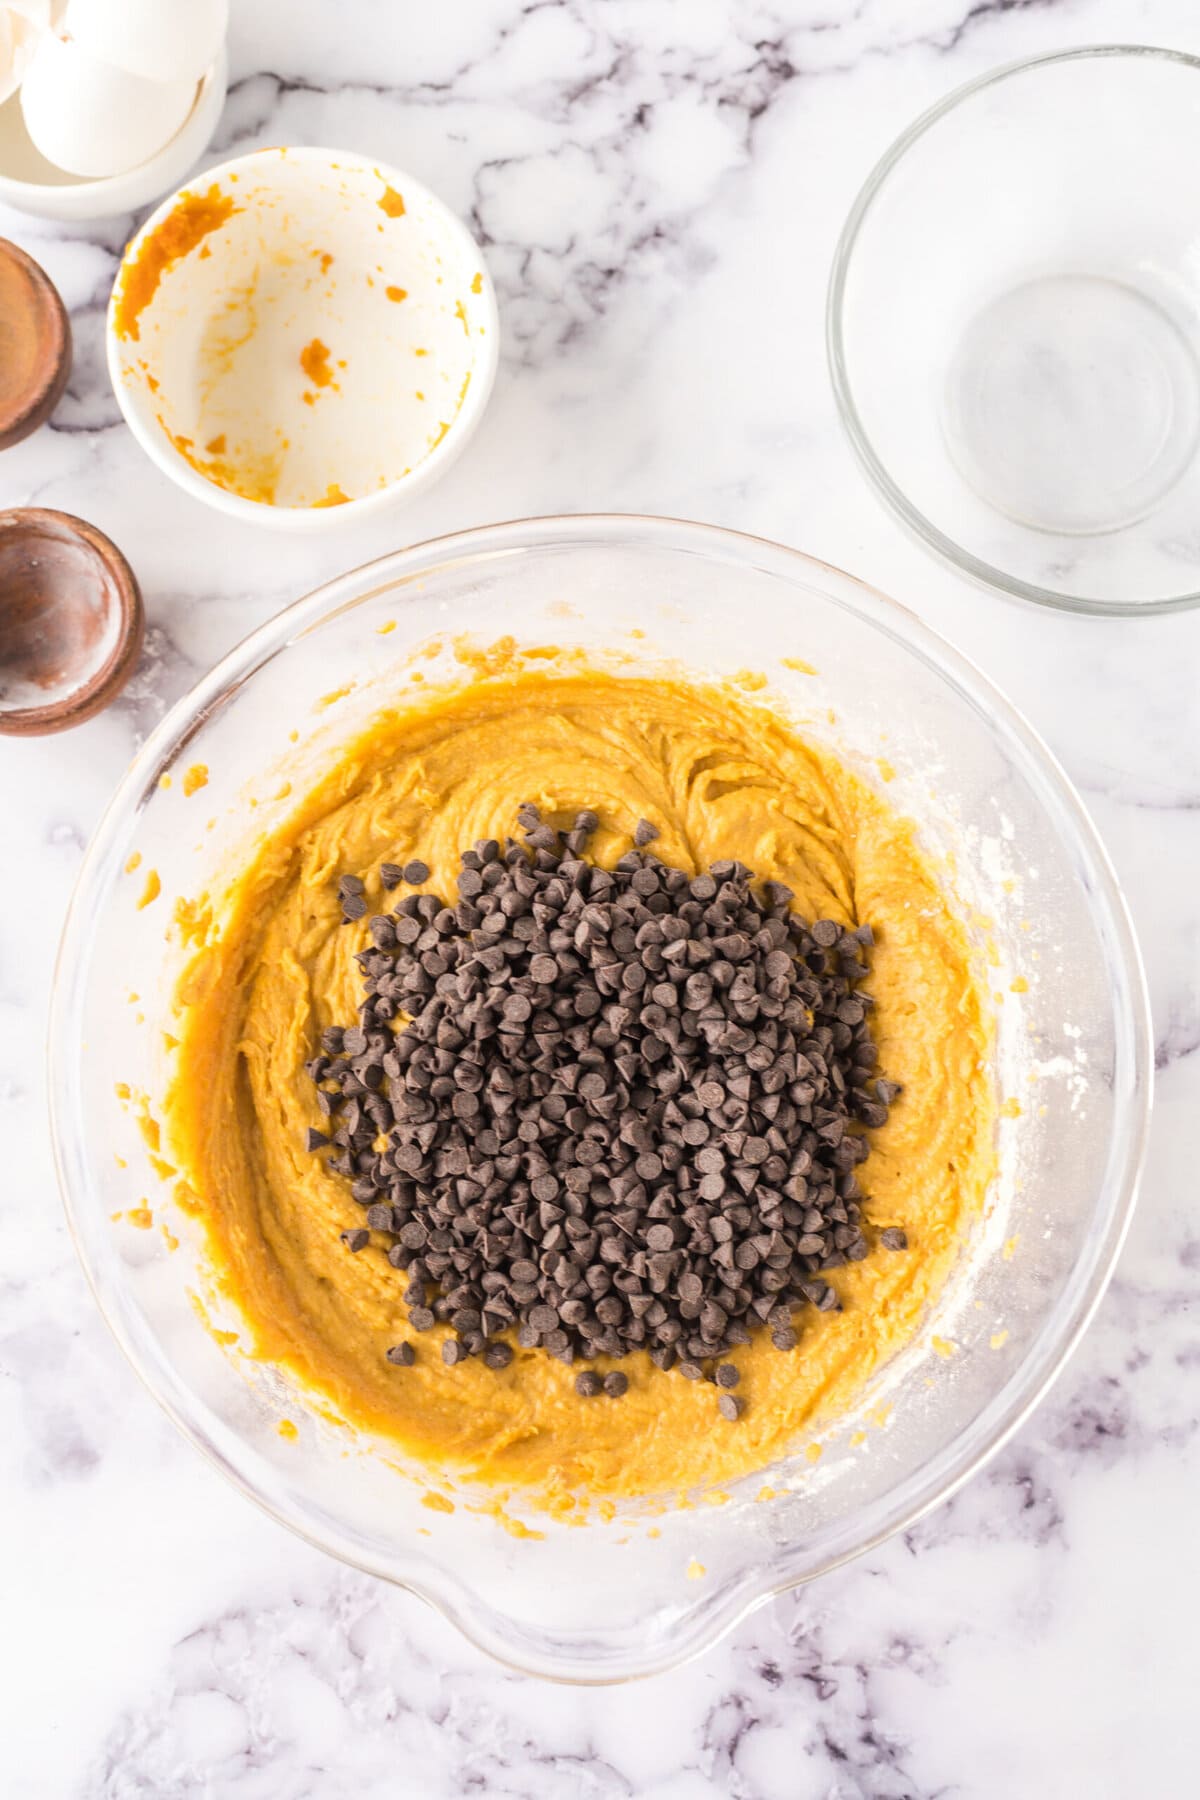 Topping the pumpkin bread batter with chocolate chips in a bowl